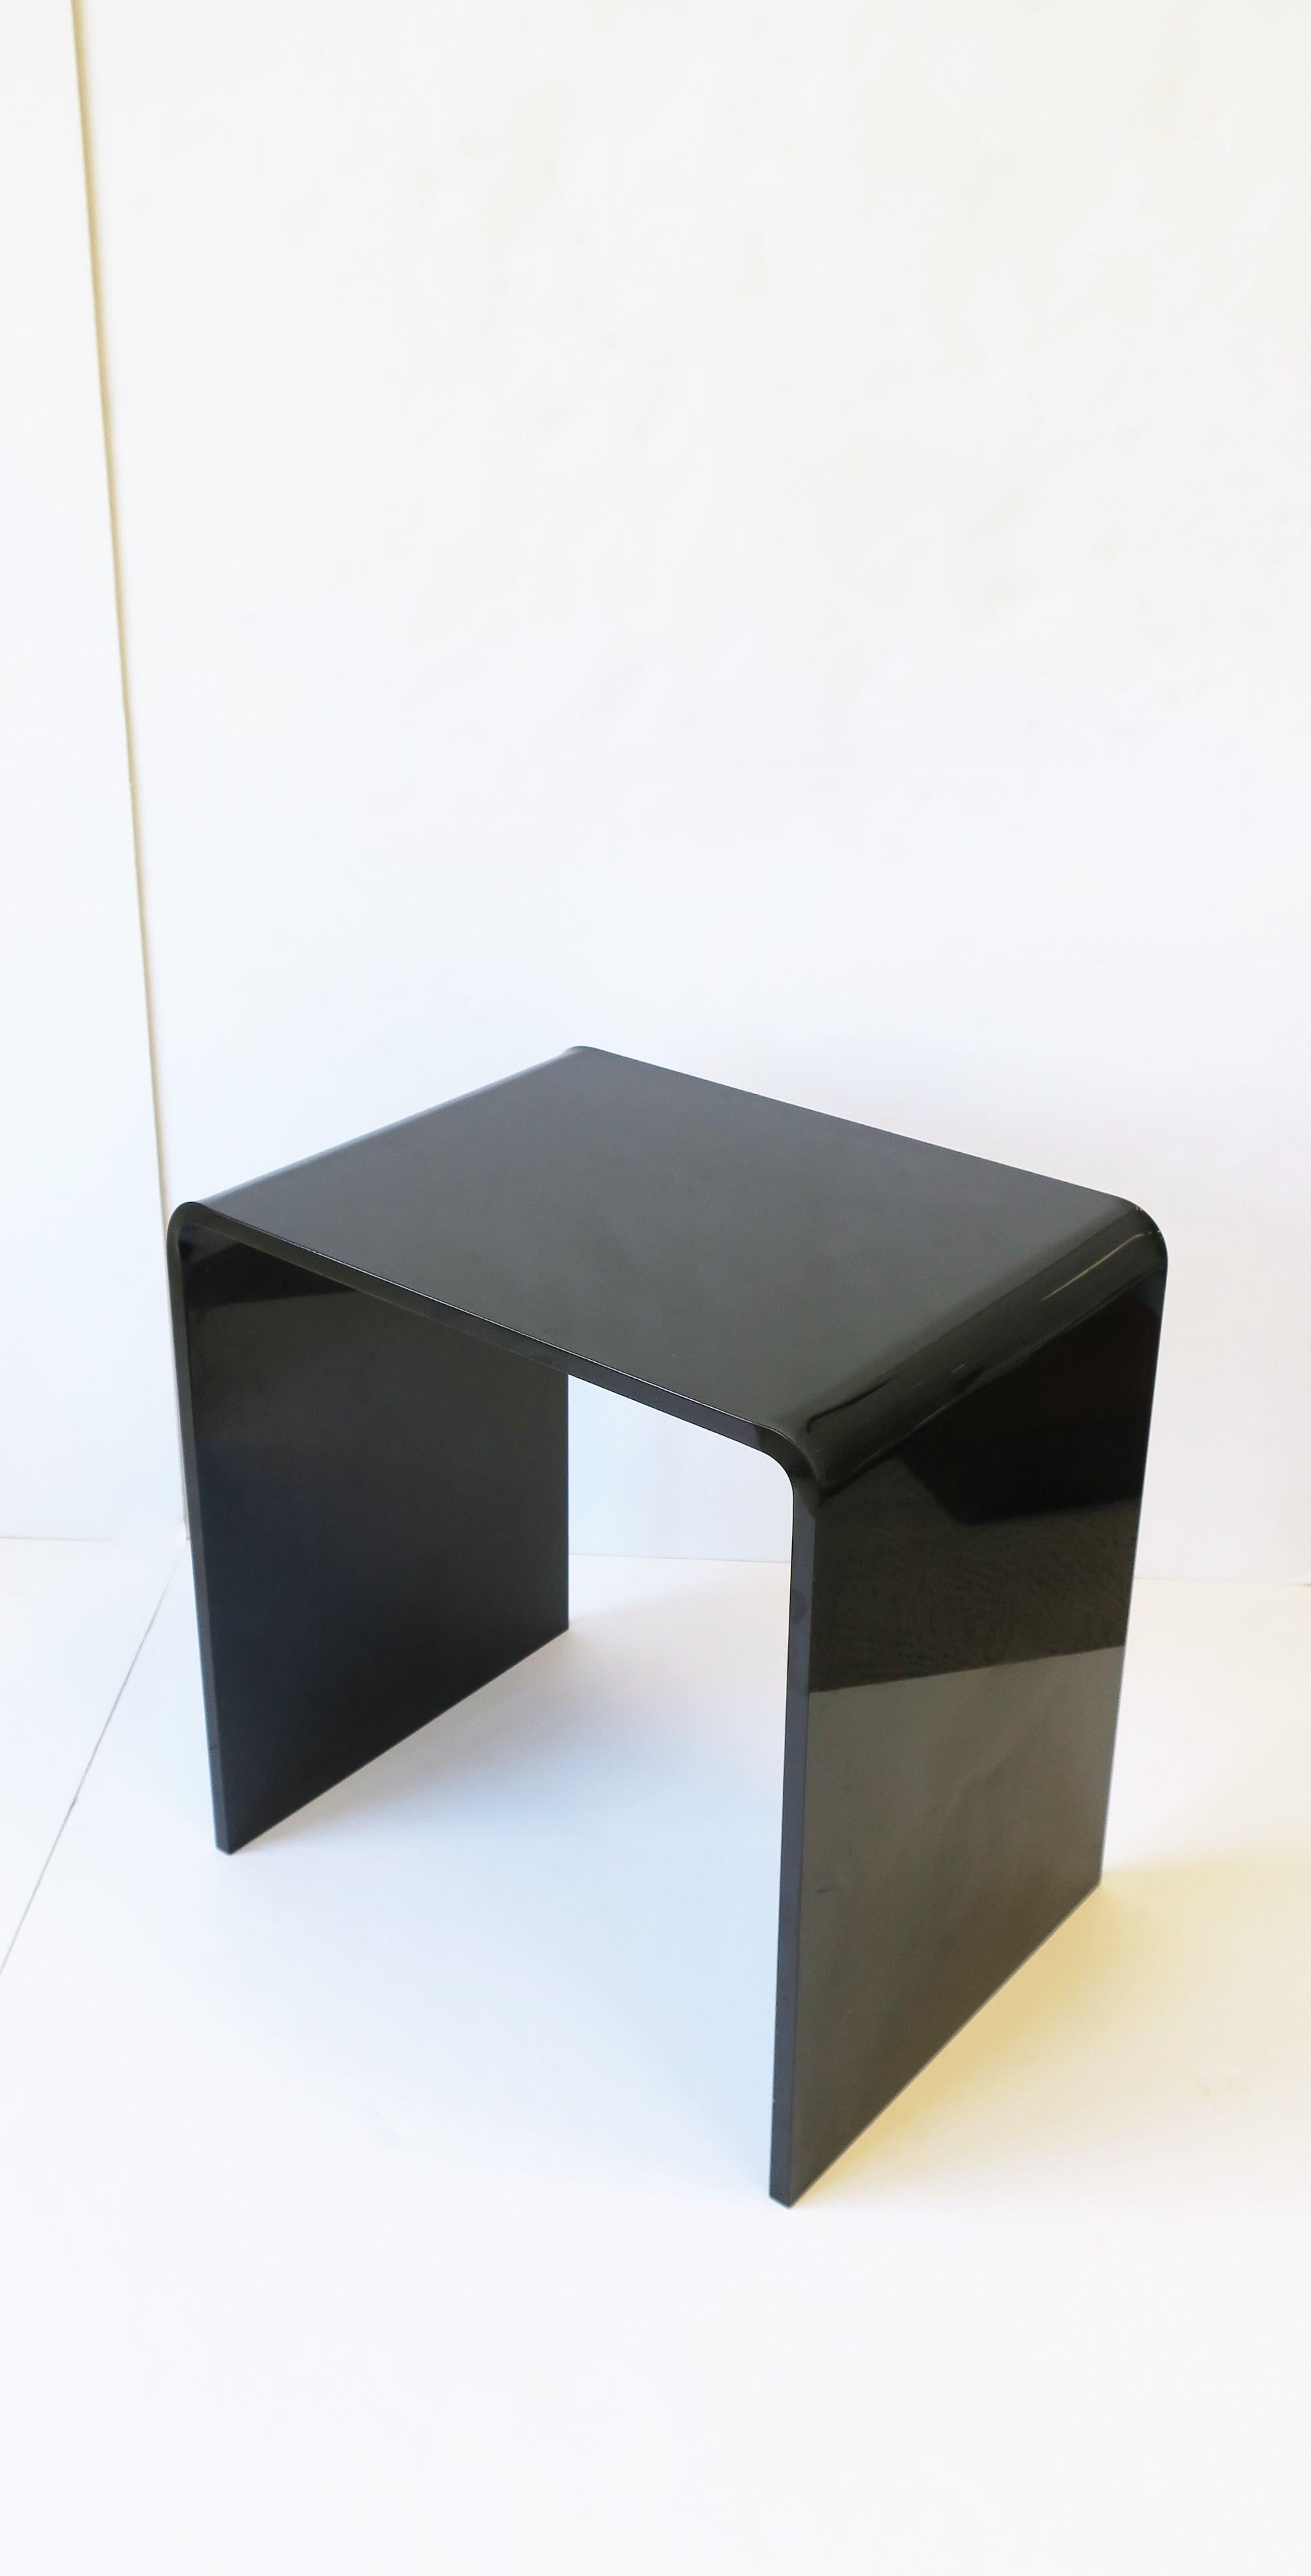 A jet-black acrylic modern style side or end table with 'waterfall' edge, circa early-21st century. Piece measures: 12